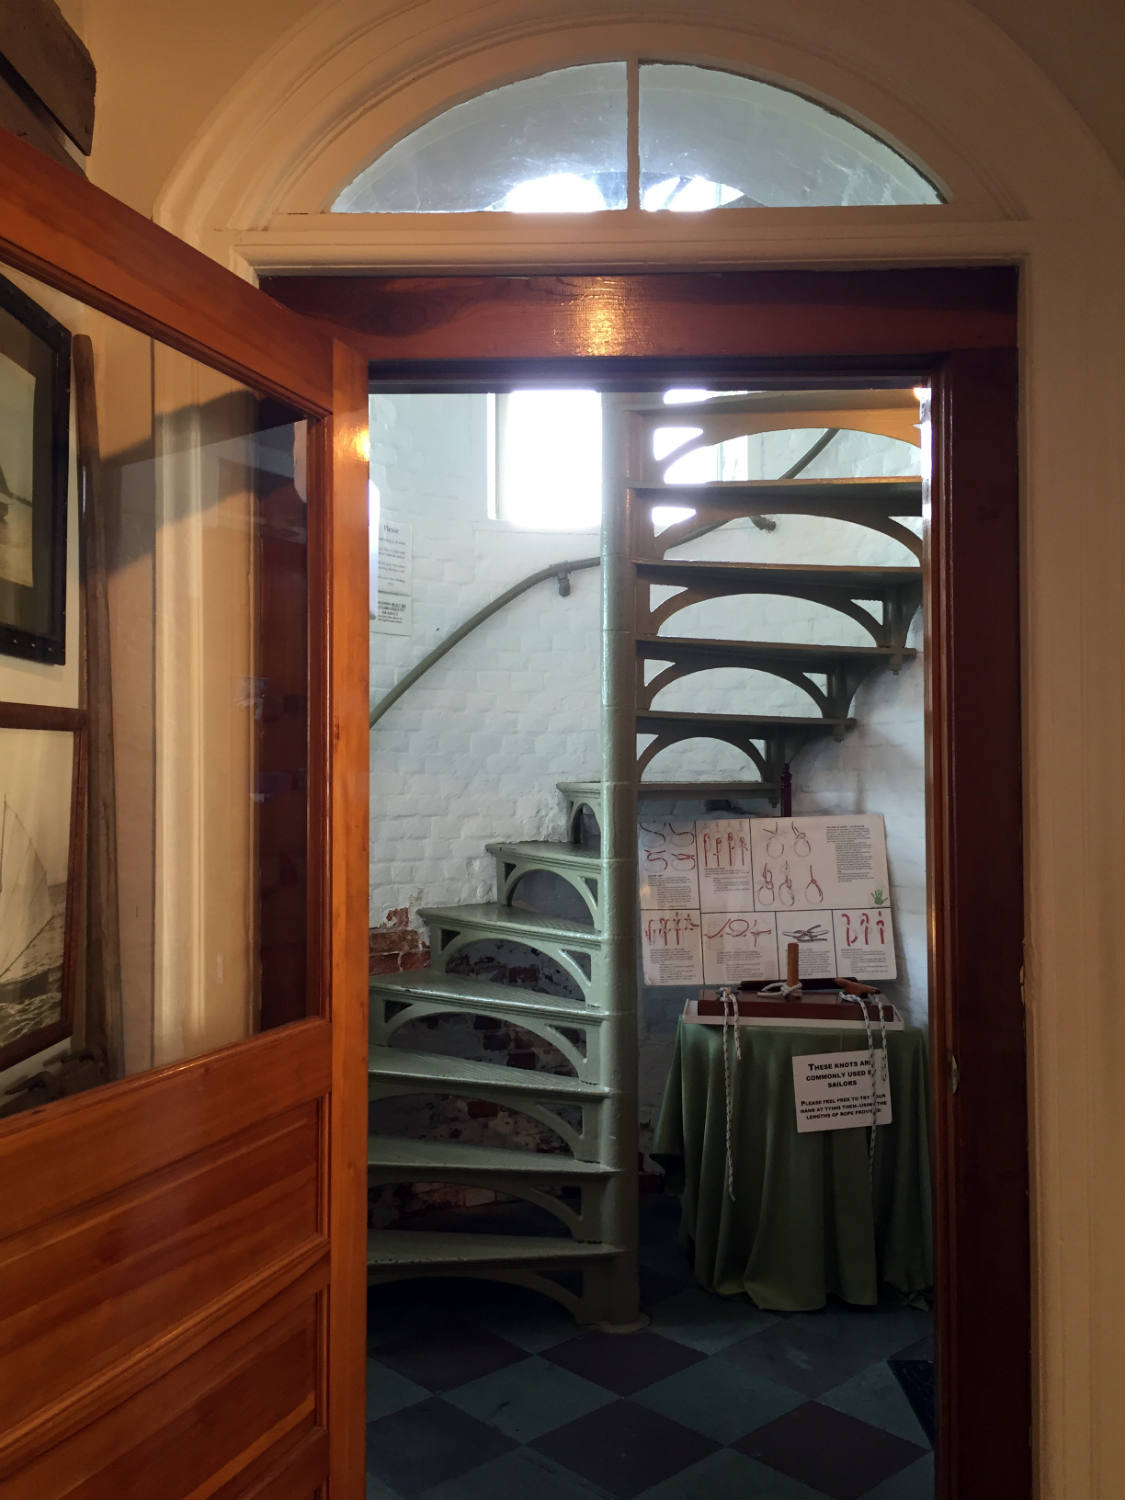 Staircase at Sodus Bay Lighthouse Museum